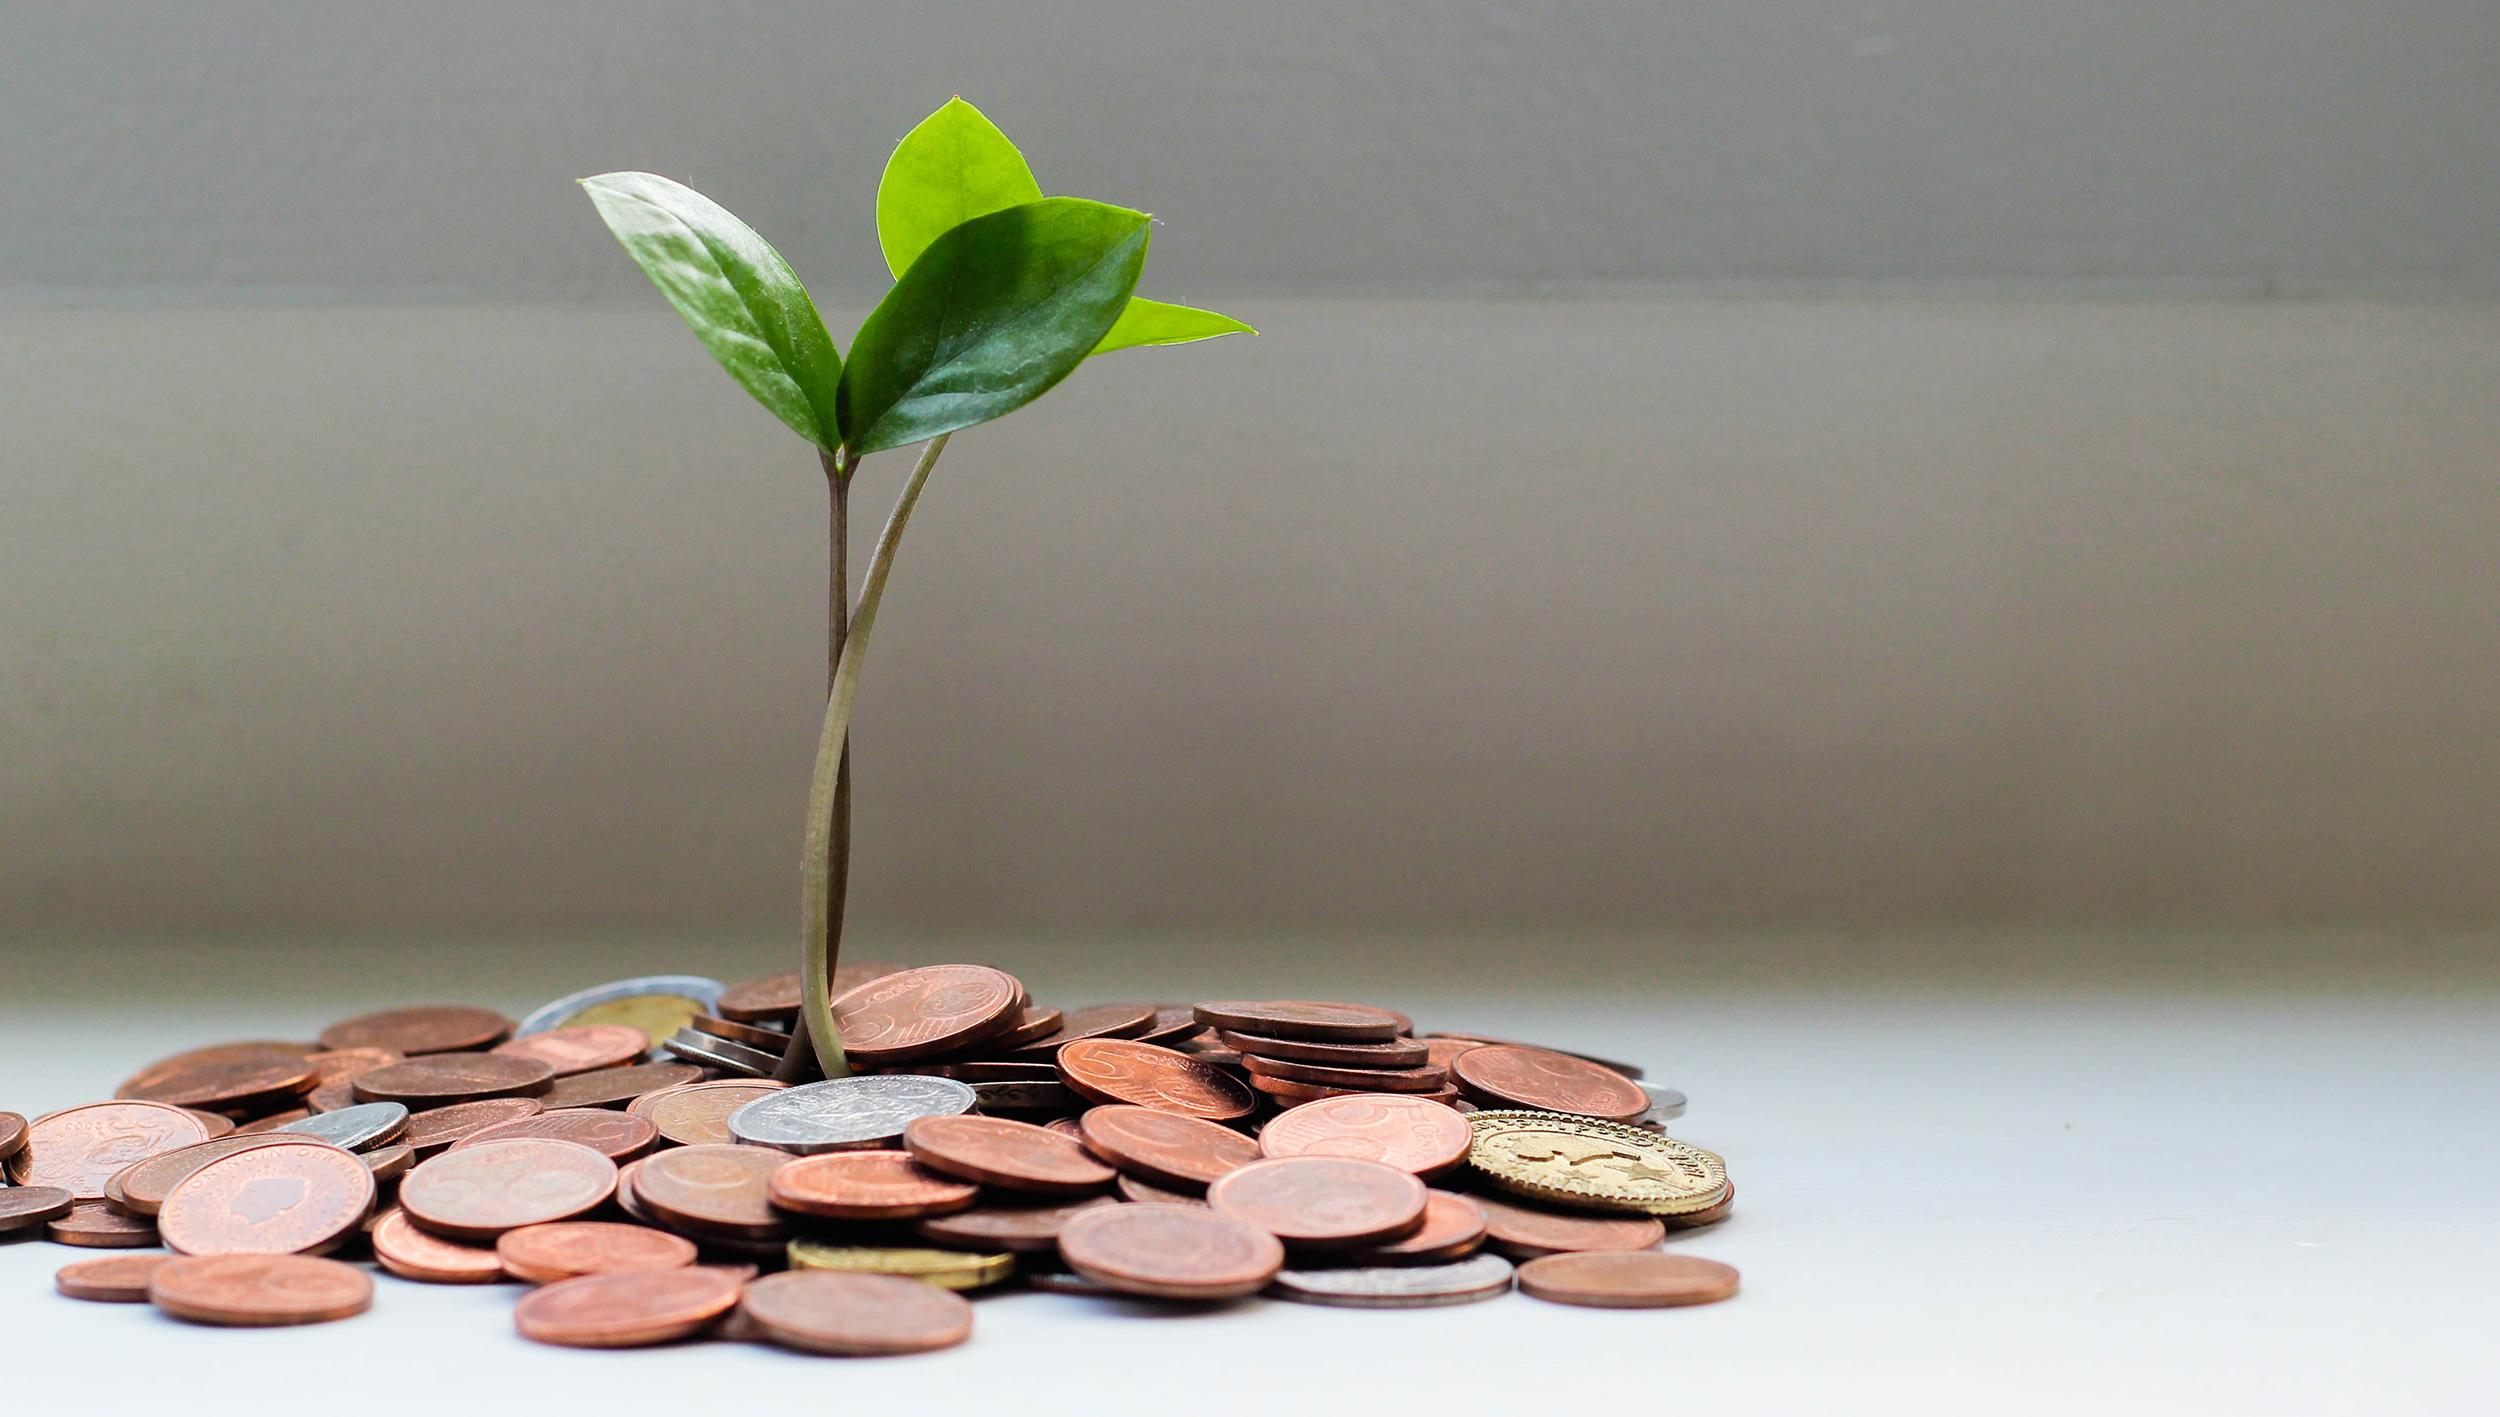 A tree seedling growing out of a pile of coins